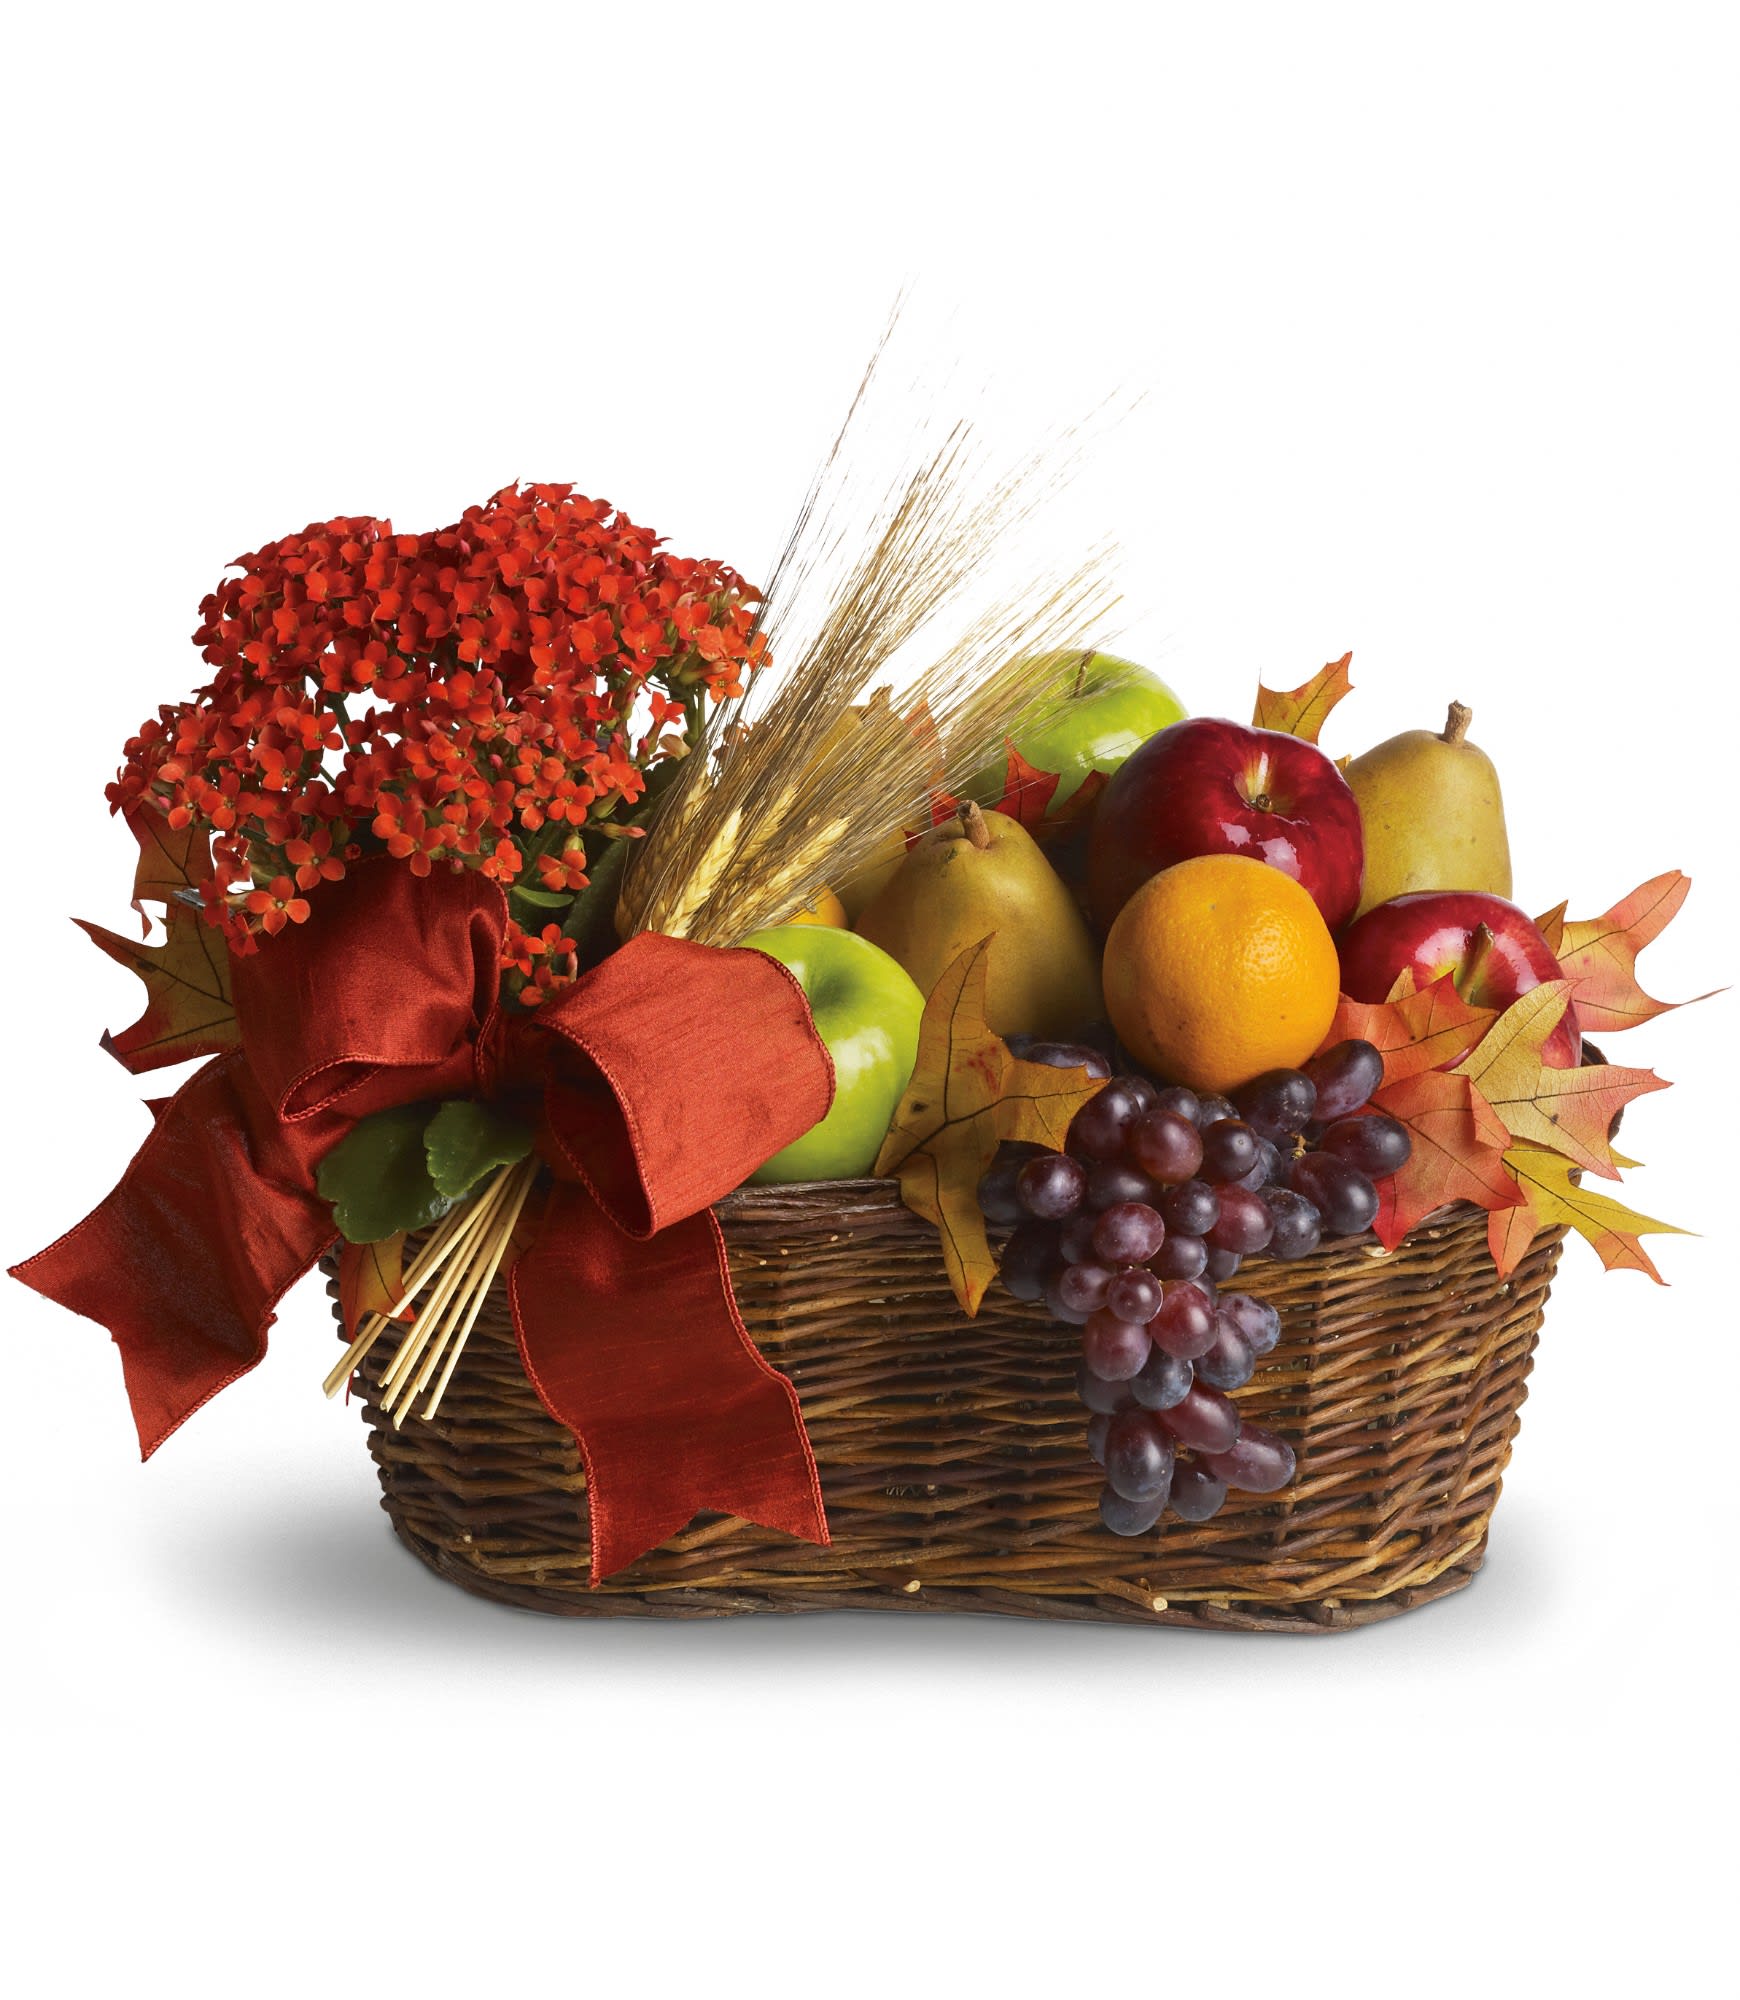 Fresh Picked - A live kalanchoe potted plant is surrounded by fresh pears, red and green apples, red grapes and tangerines. Add some wheat stalks and a pretty taffeta ribbon and what you've got is a basket full of goodness. Approximately 19&quot; W x 15 1/2&quot; H. T174-3A